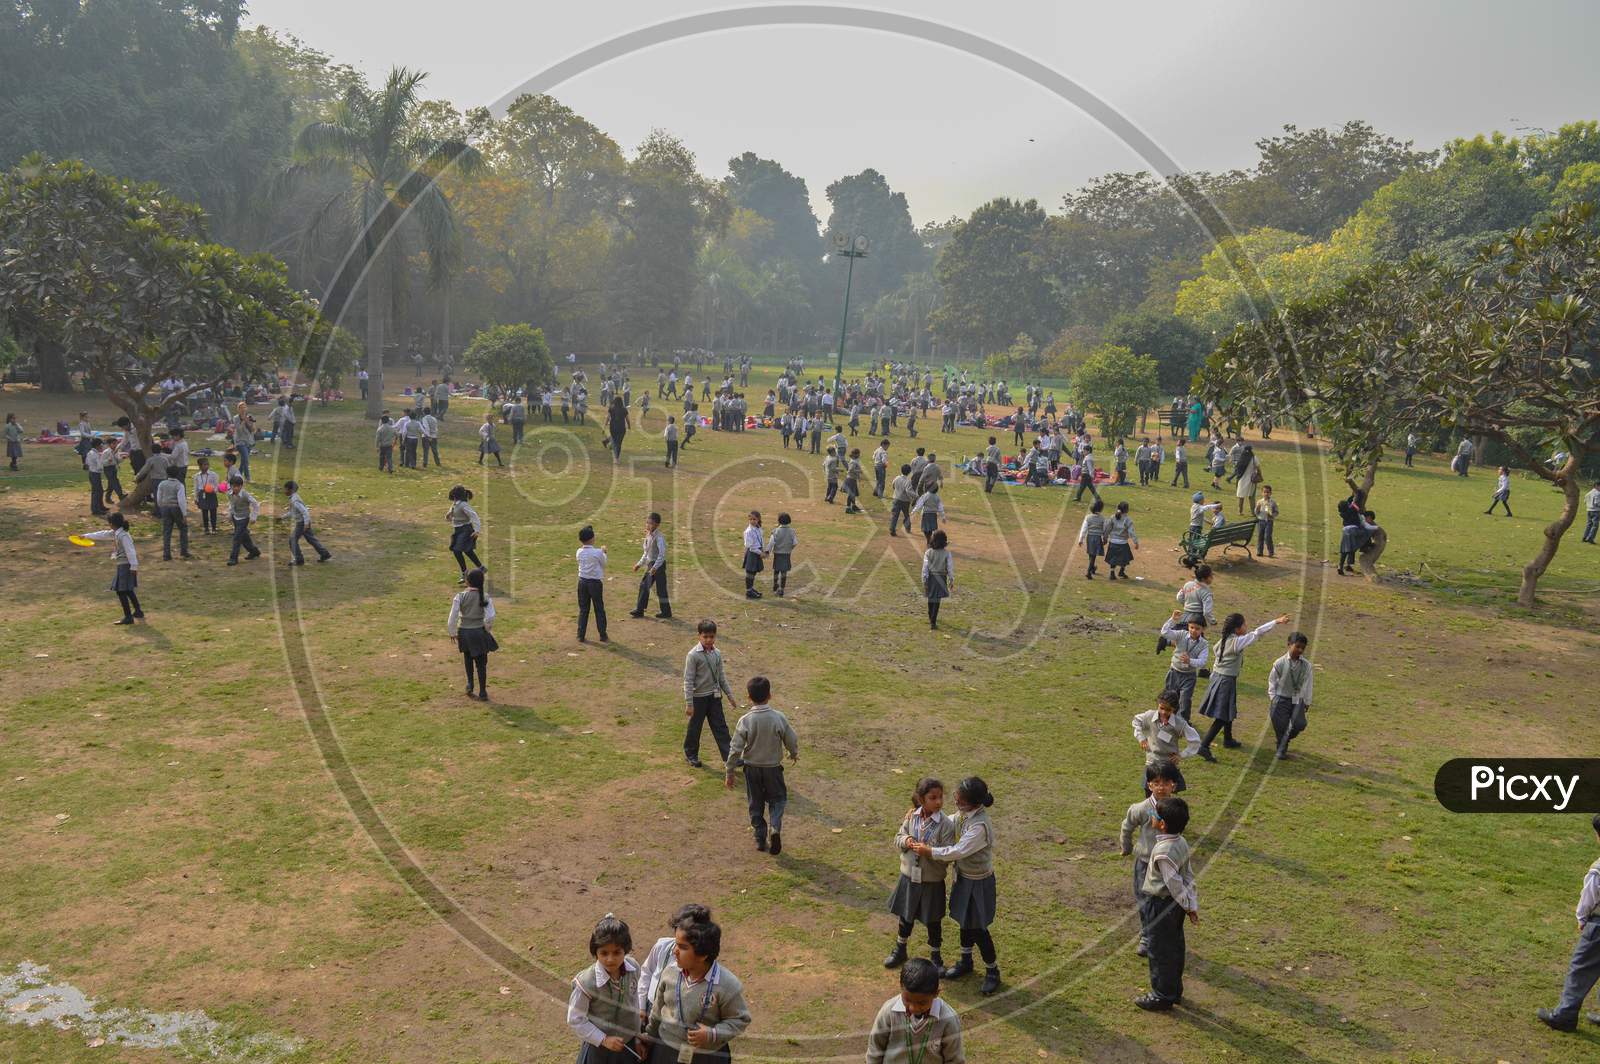 A Bunch Of Student, Children Playing Around The Lodhi Garden Park At Foggy Morning.